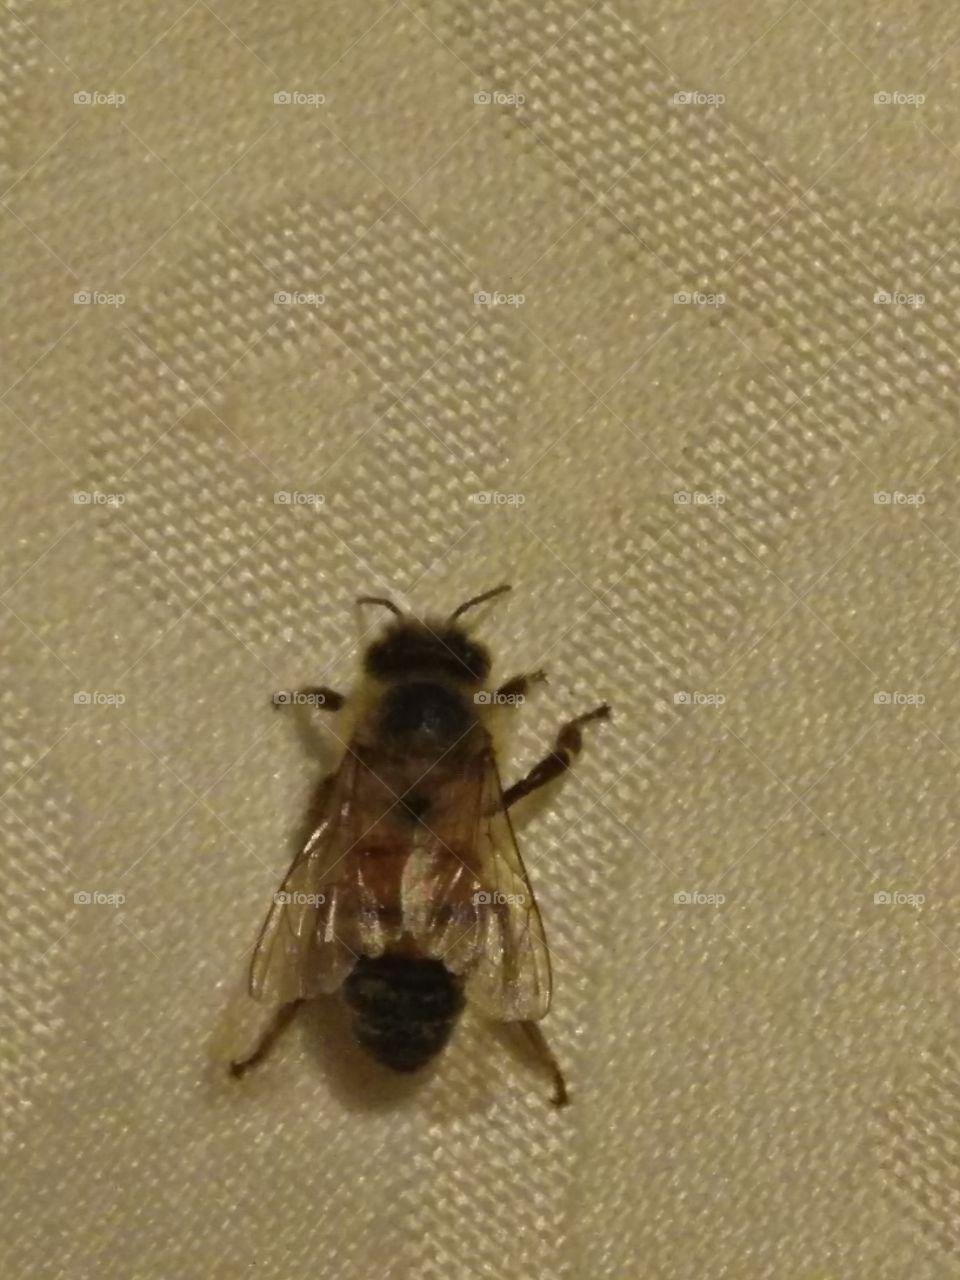 a closeup view of a resting bee found on a house tablecloth